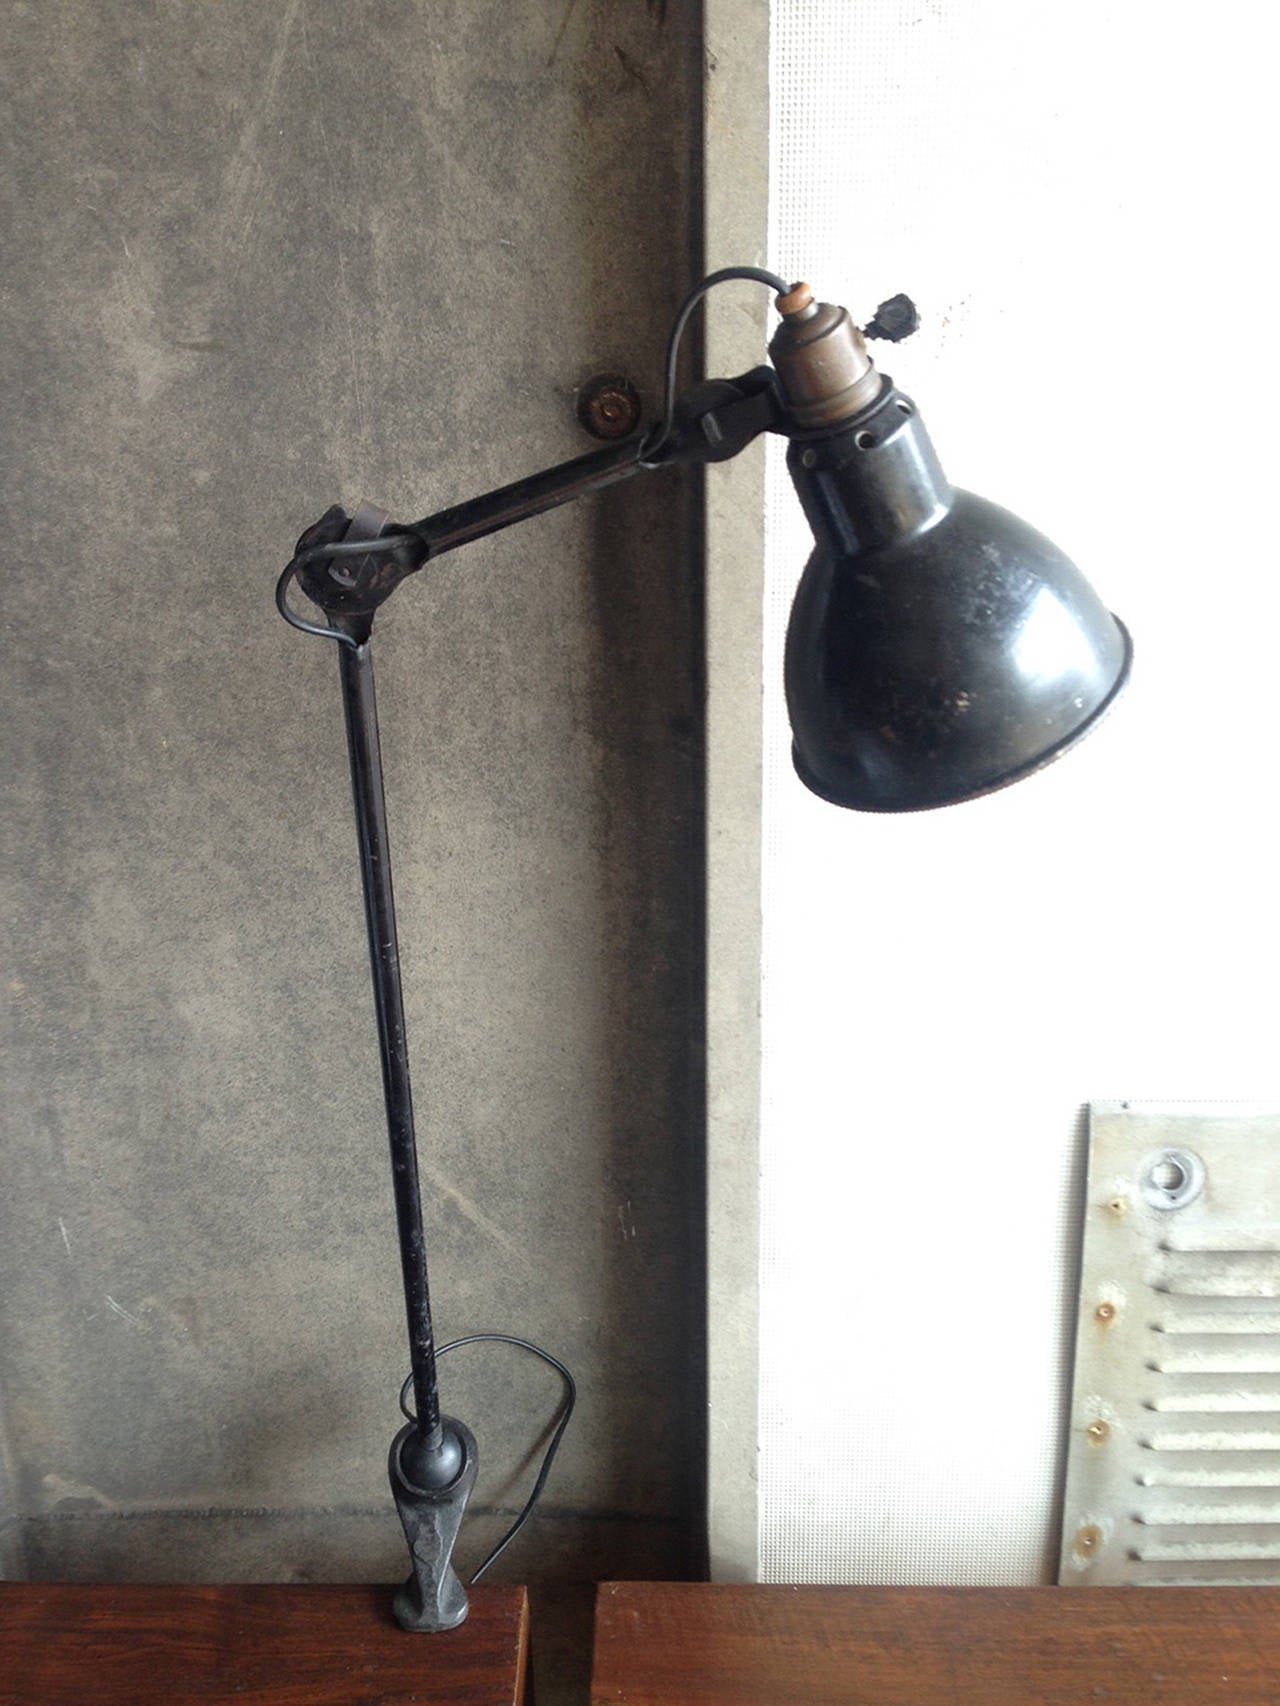 Original,1921 adjustable Lampe Gras Model 201. Cast steel with pivoting ball joint and table-top clamp. Bernard-Albin Gras, born in France in 1886, was an engineer dedicated to improving working conditions of mass labourers. An admirer of the lamp's